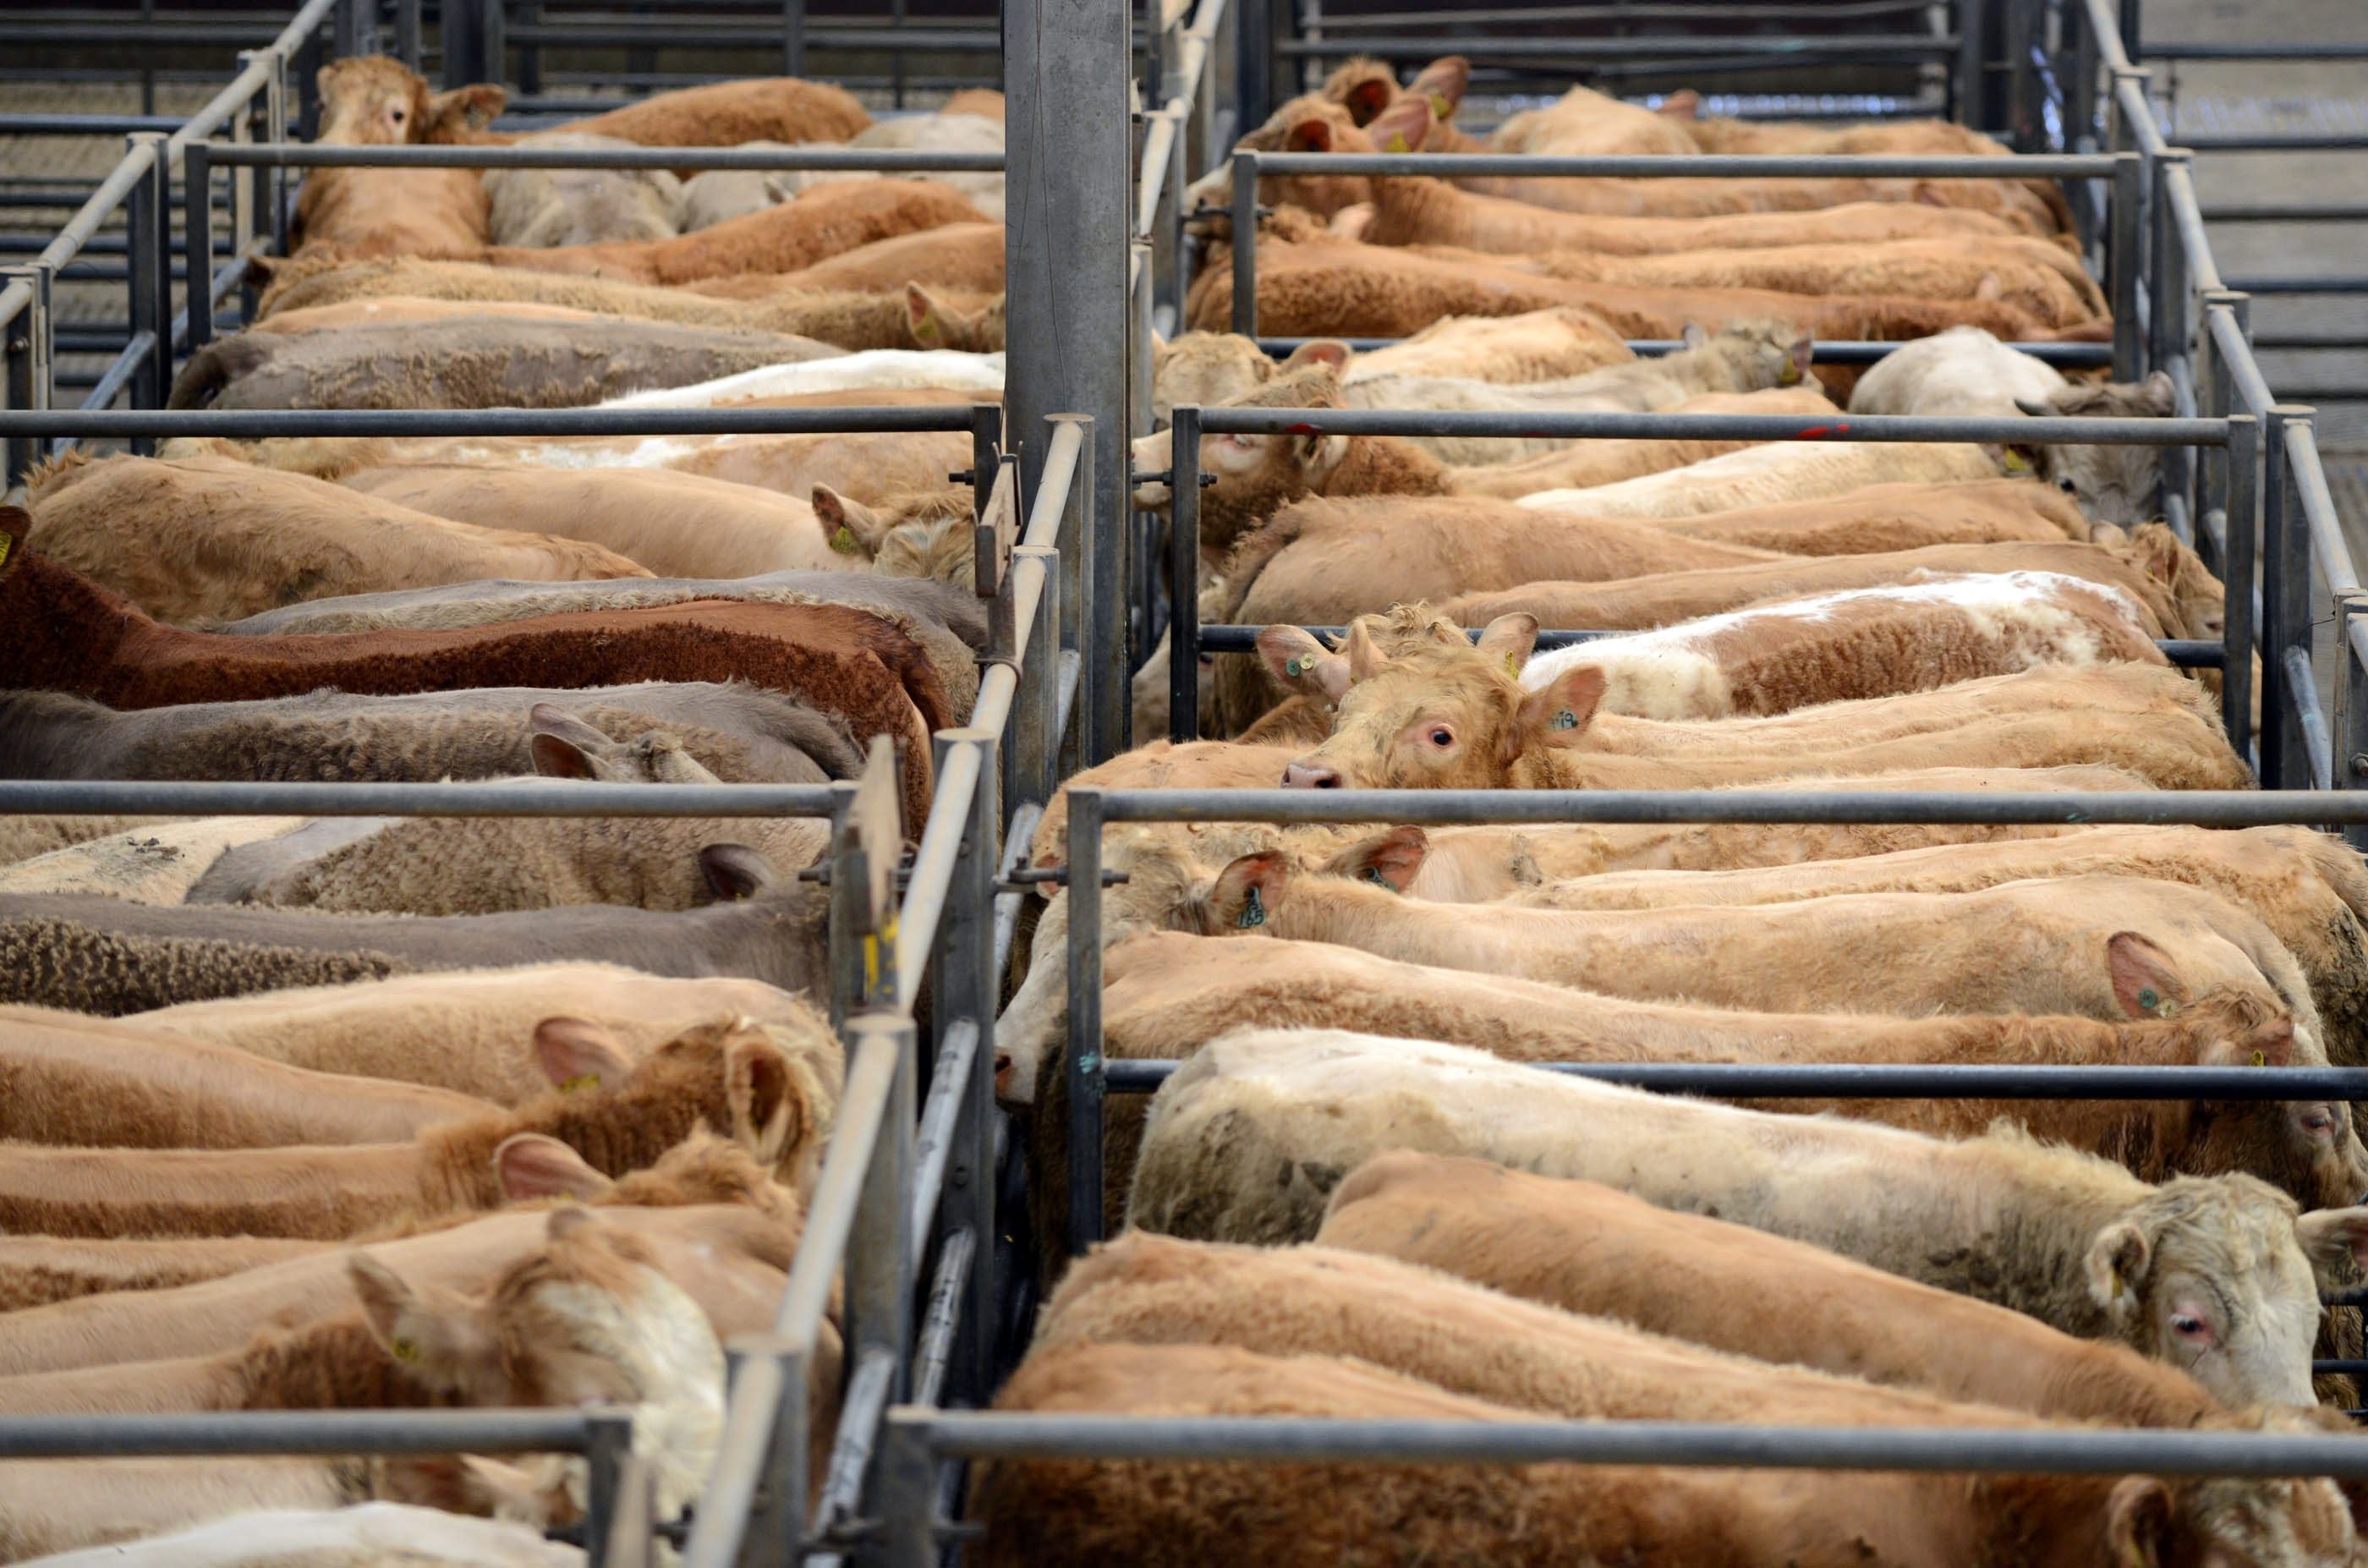 Defra has launched a traceability system for farm livestock in England.